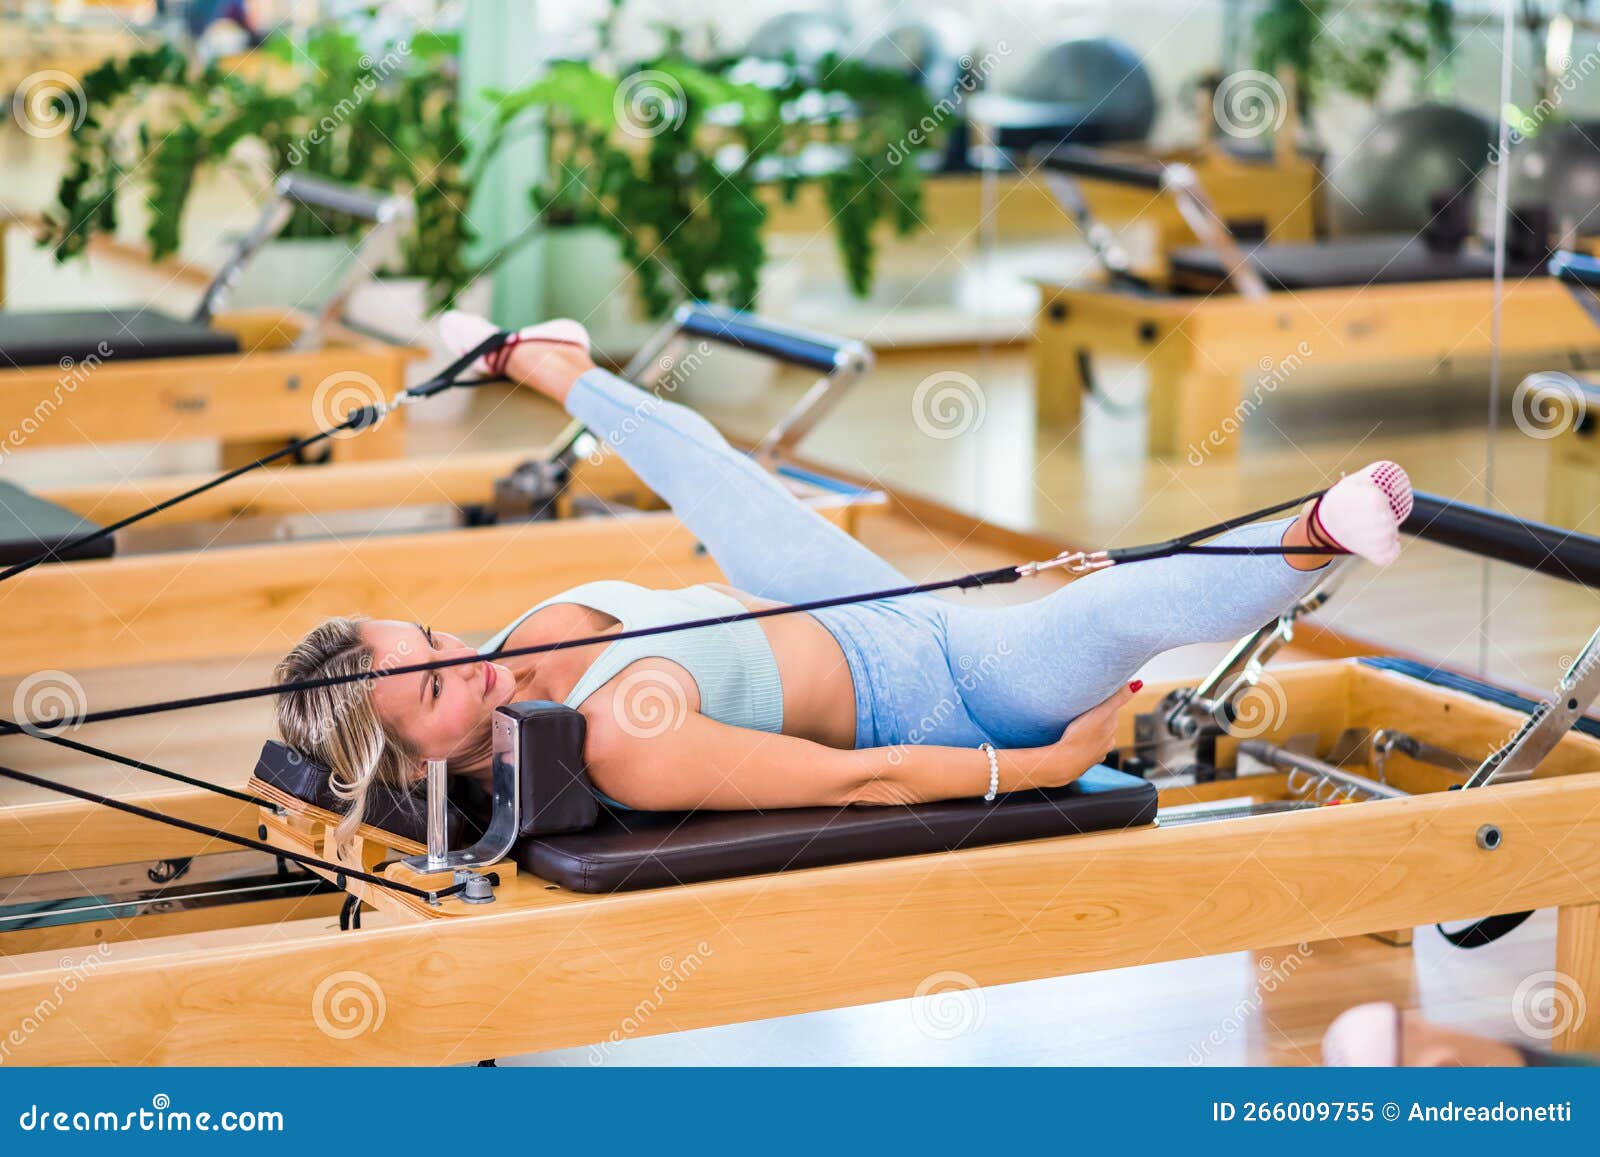 woman stretching legs on pilates reformer